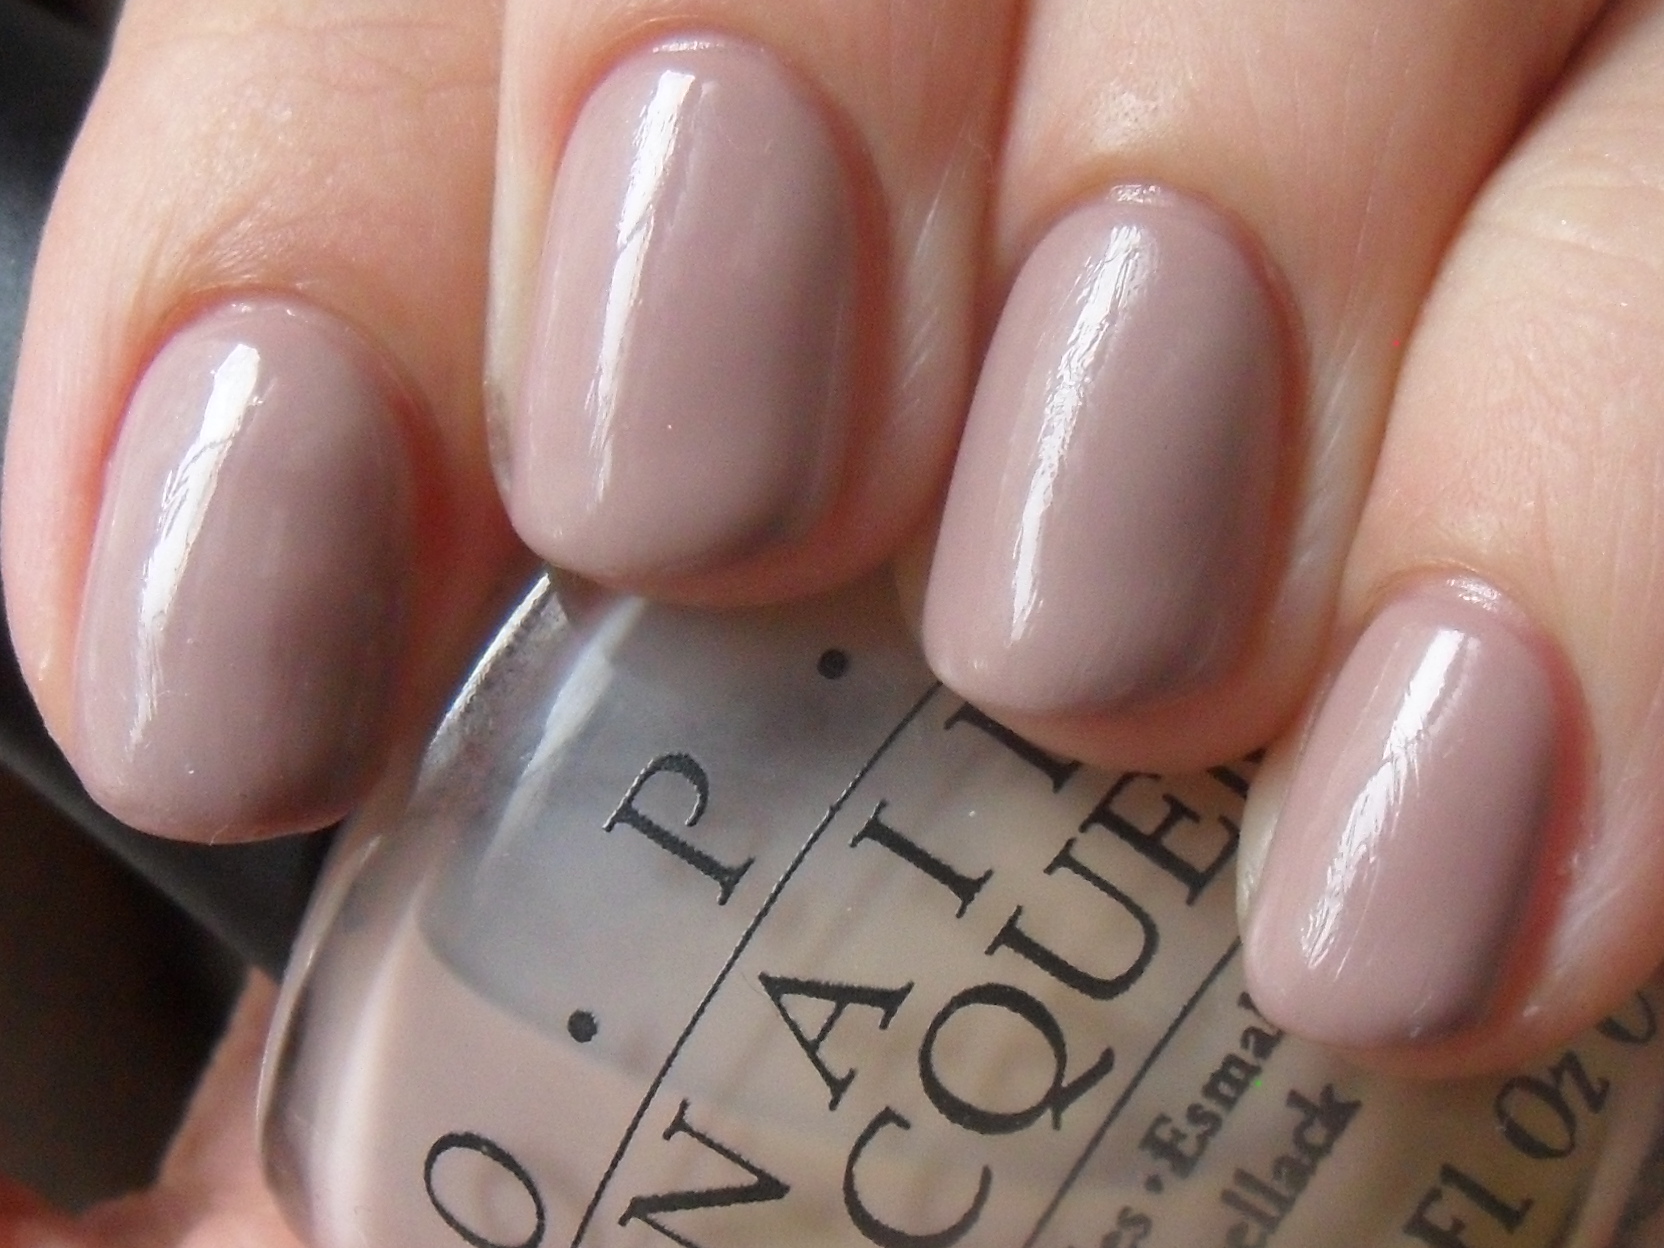 For my next neutral I’ve picked OPI Tickle My France-y (La Collection de Fr...